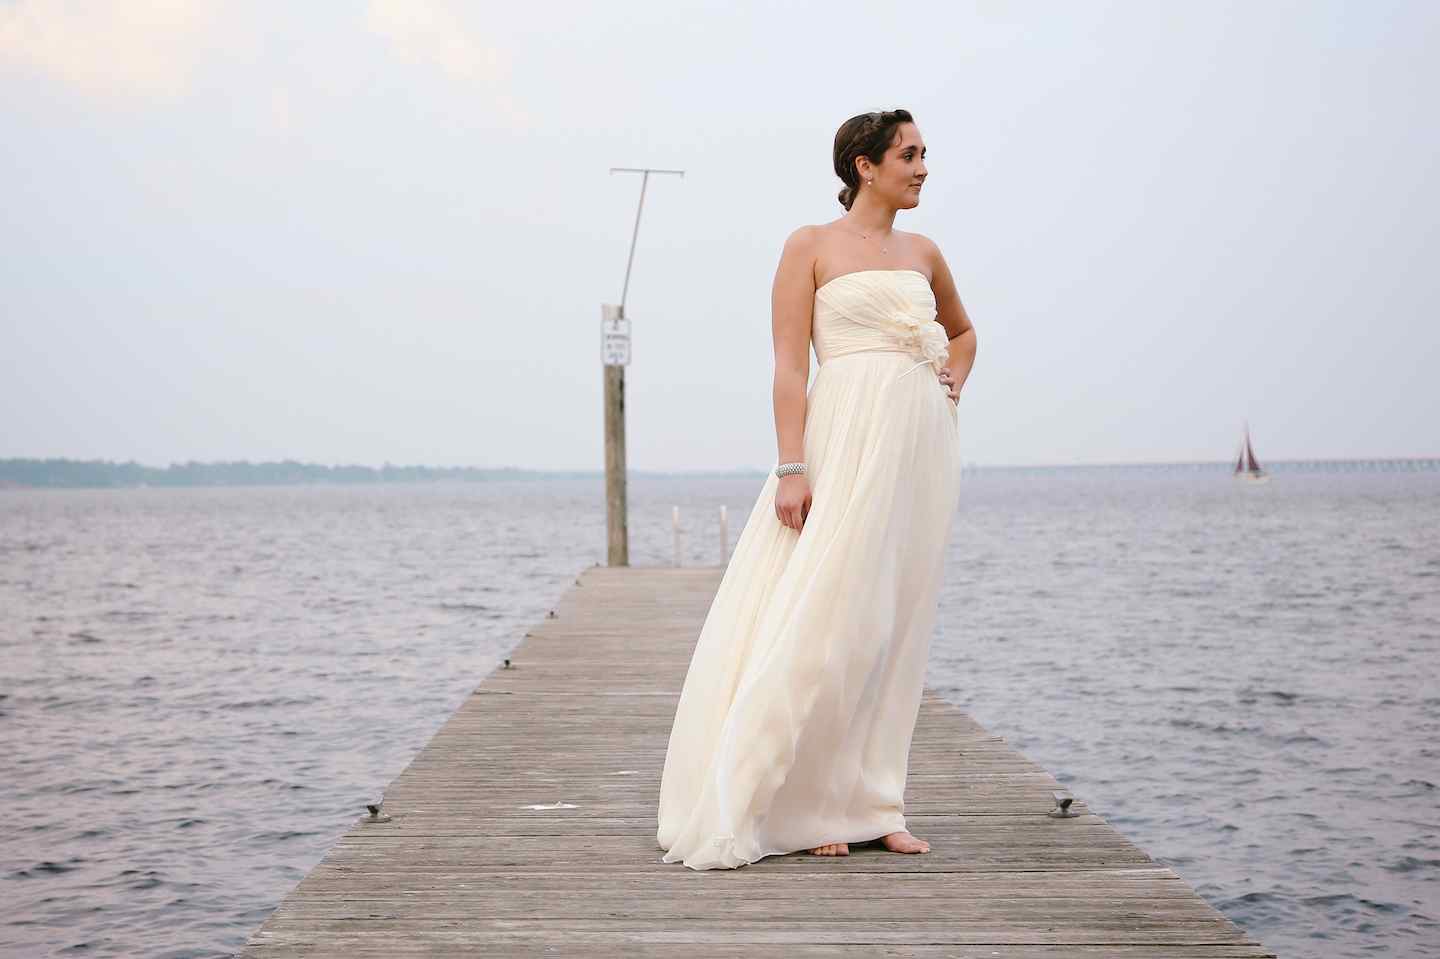 Bride on a Boat